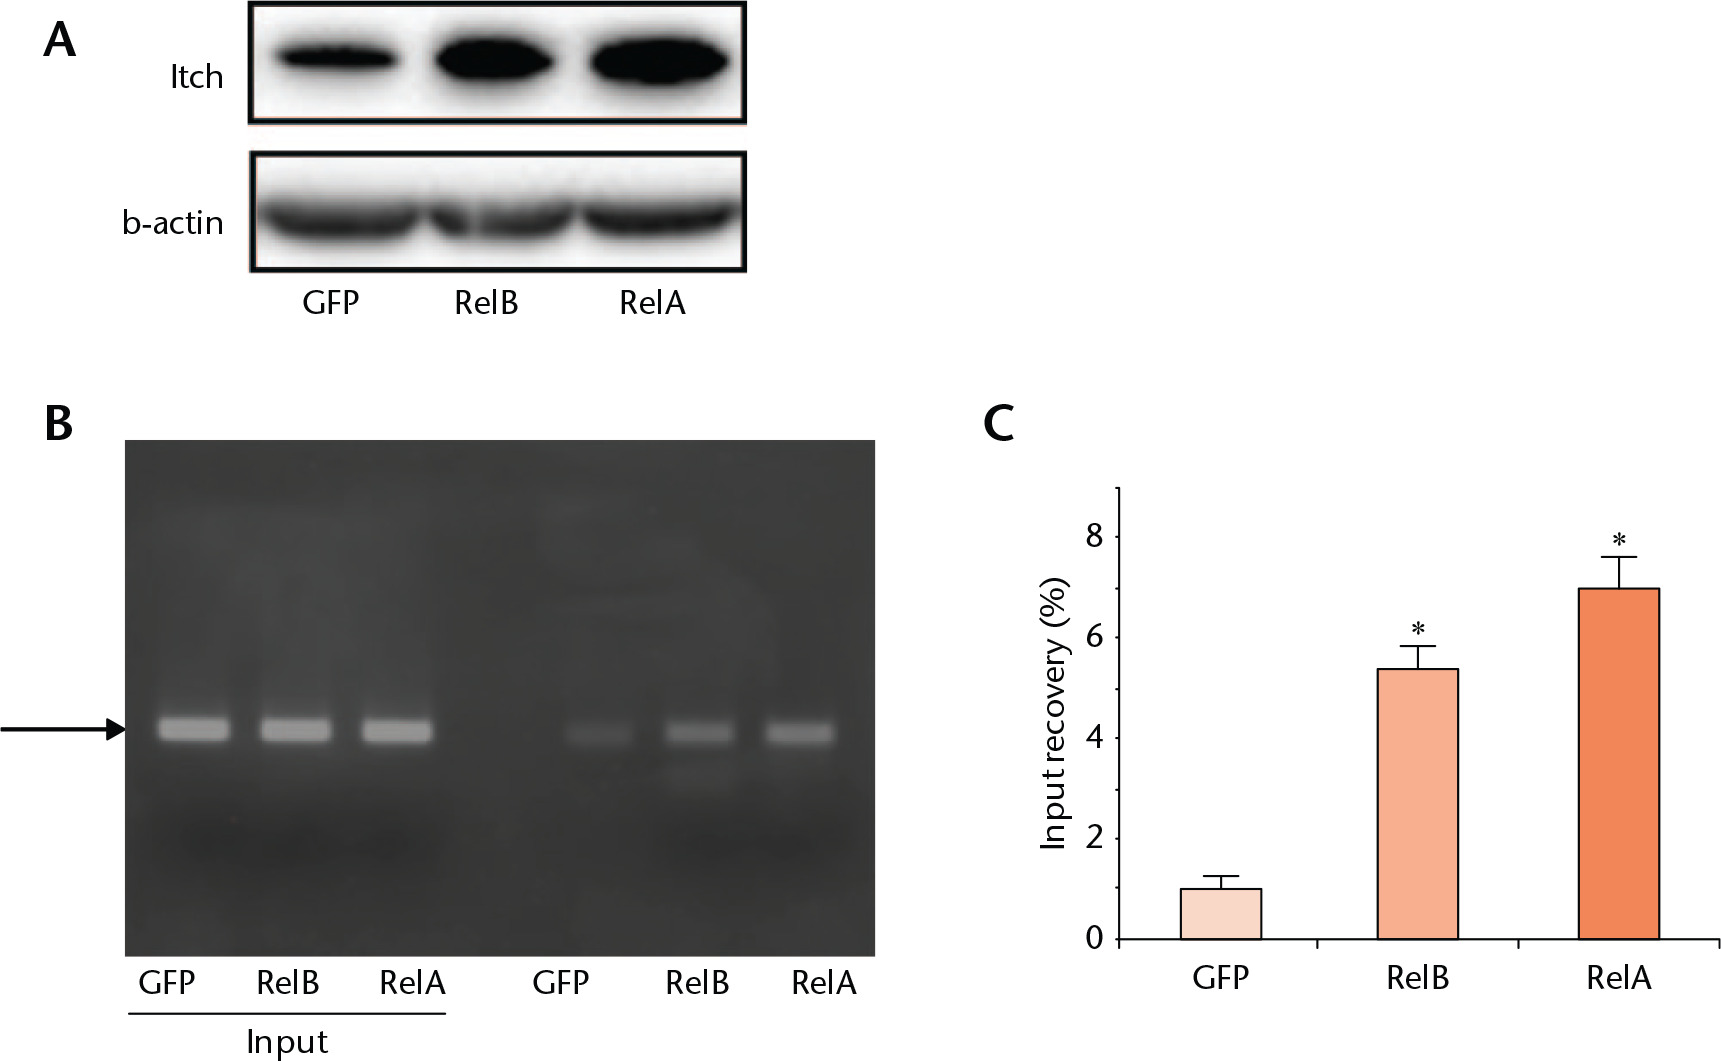 Fig. 4 
            NF-κB upregulates Itch expression in osteoblasts. C2C12, an osteoblast/myoblast cell line, was infected with GFP control, NF-κB RelA or RelB virus for 24 hours. a) Expression levels of Itch protein were determined by Western blot analysis. b) Chromatin immunoprecipitation (ChIP) assays were performed on immunocomplexes that were pulled down with anti-RelA, anti-RelB antibody or Immunoglobulin G (IgG). Precipitated DNA was measured by polymerase chain reaction (PCR) and quantitative PCR using sequence-specific primers. Values are mean (sd) of determinates in triplicate. * p < 0.05 versus green fluorescent protein (GFP)-infected samples.
          